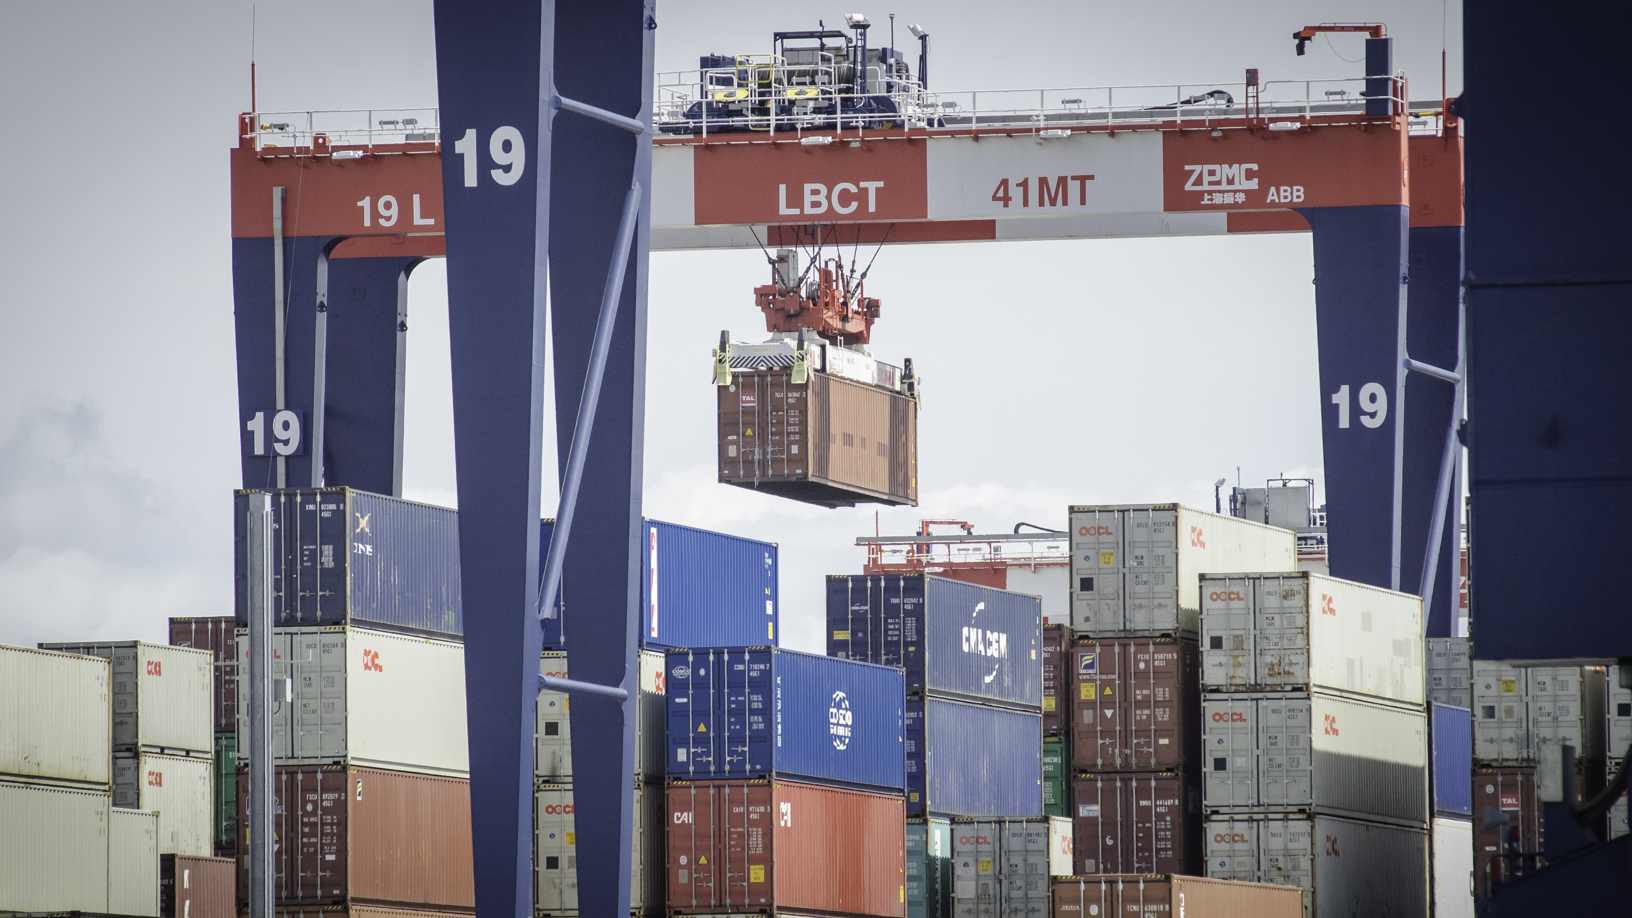 Rail-mounted gantry cranes cull container stacks at the Port of Long Beach.